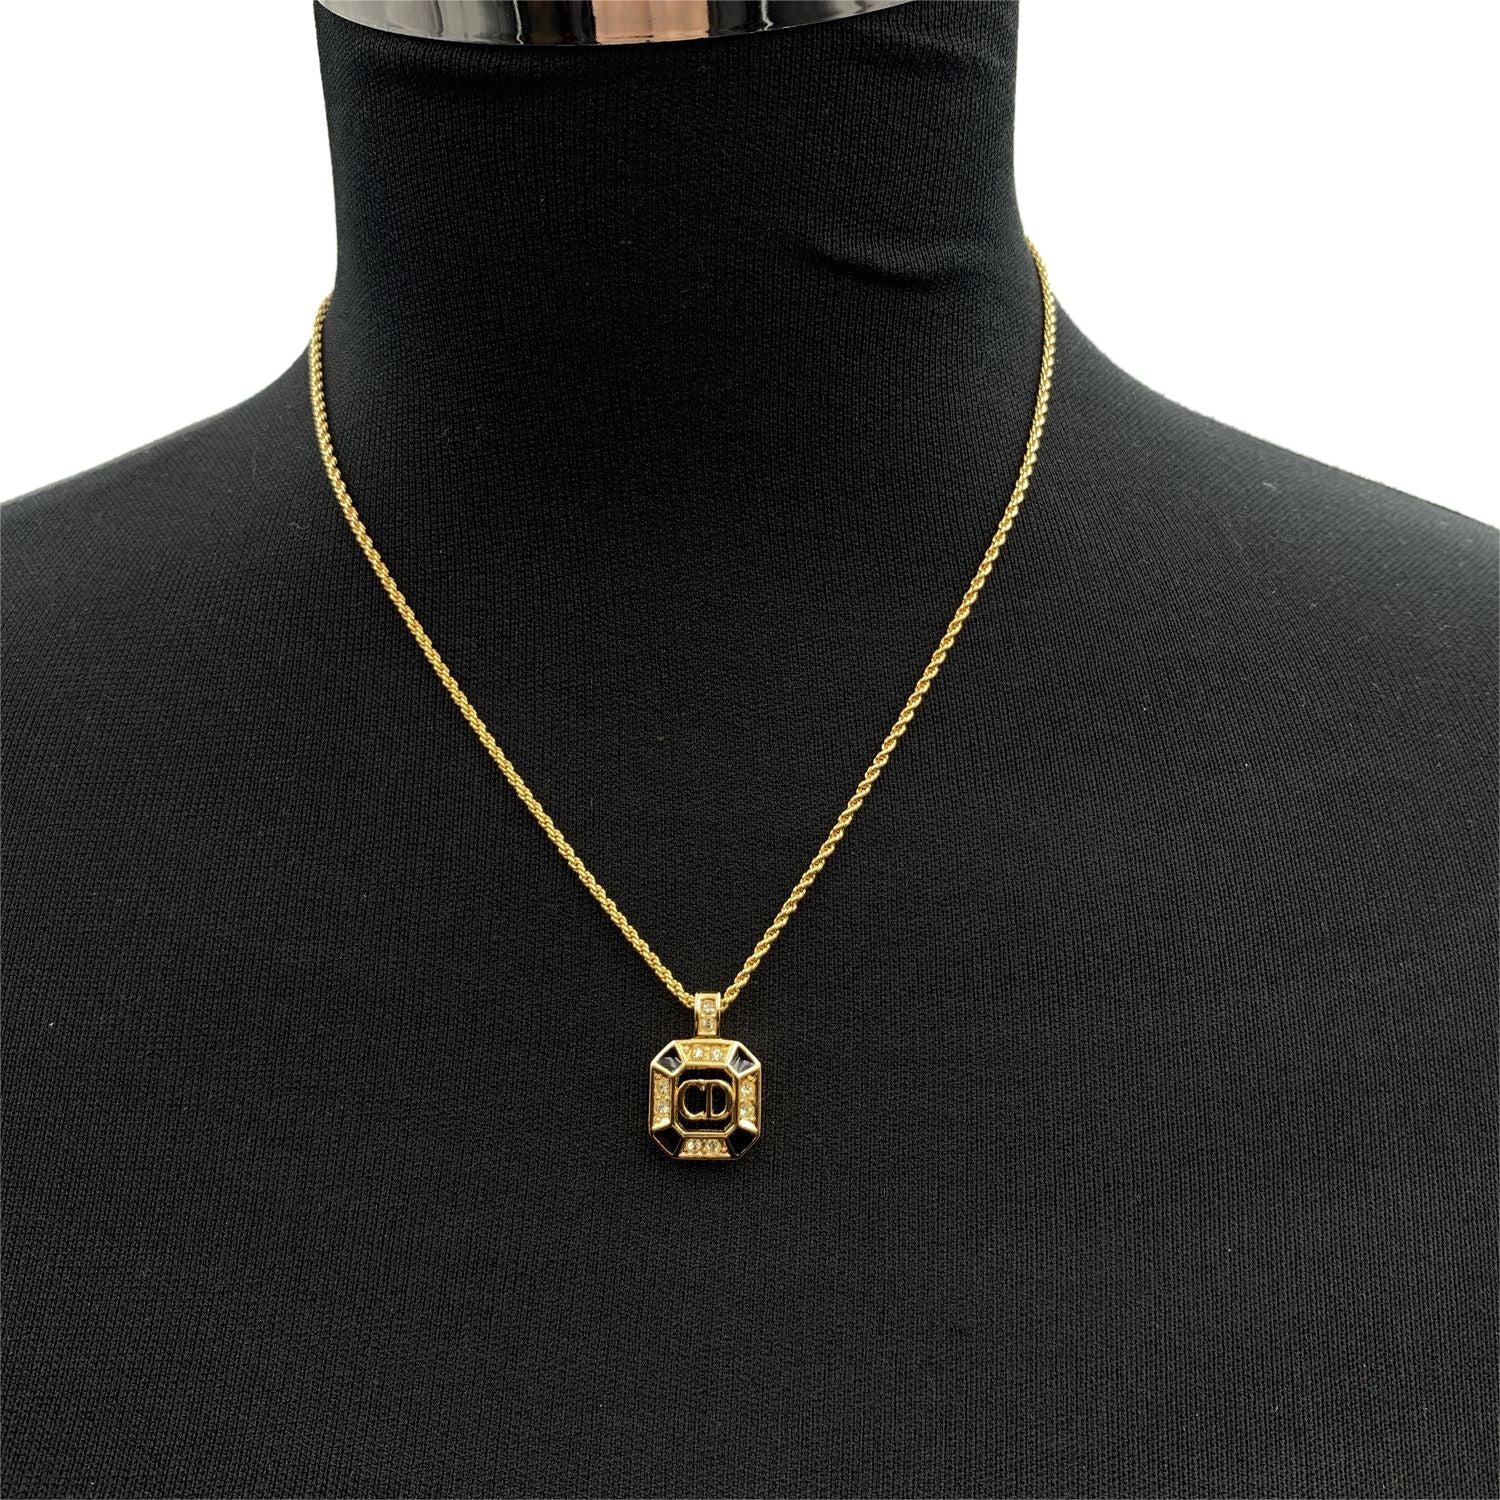 Christian Dior Vintage Gold Metal CD Square Pendant Chain Necklace In Excellent Condition For Sale In Rome, Rome